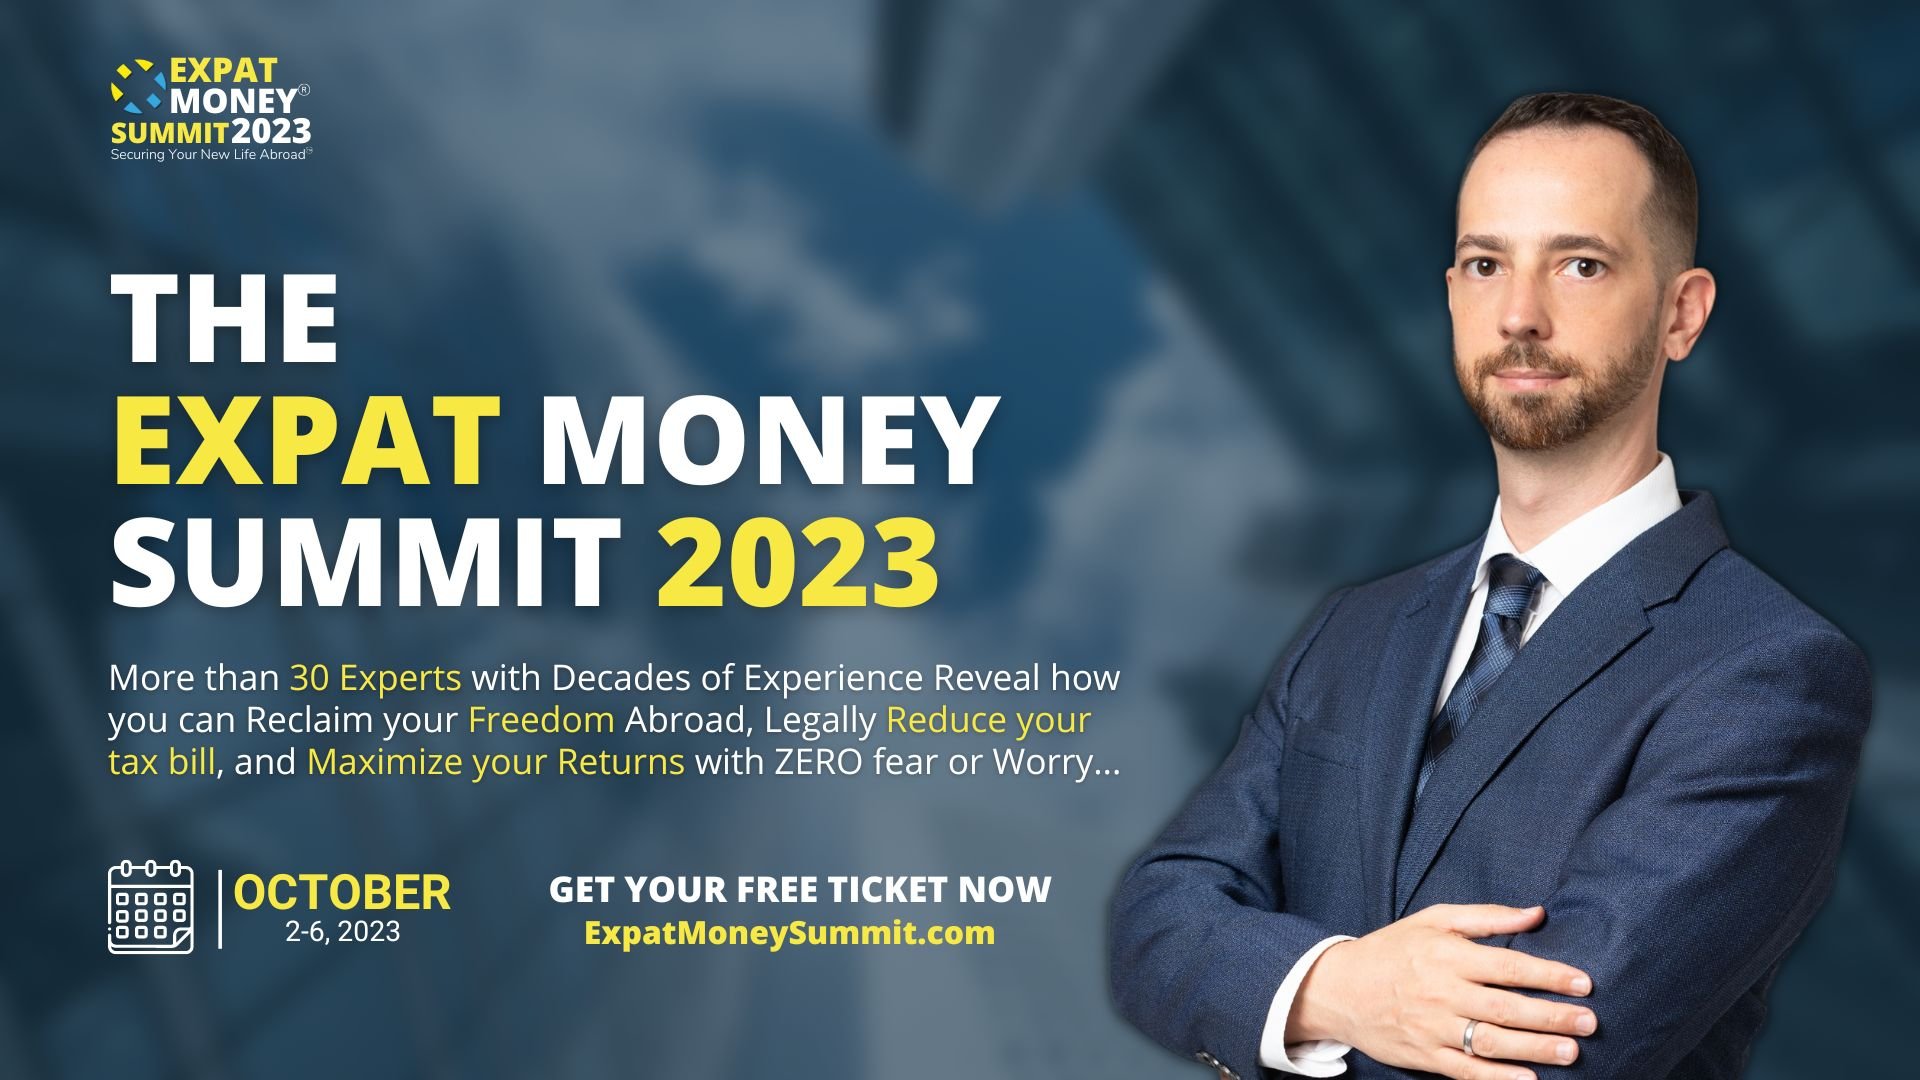 Mikkel Thorup is the host of the Expat Money Summit